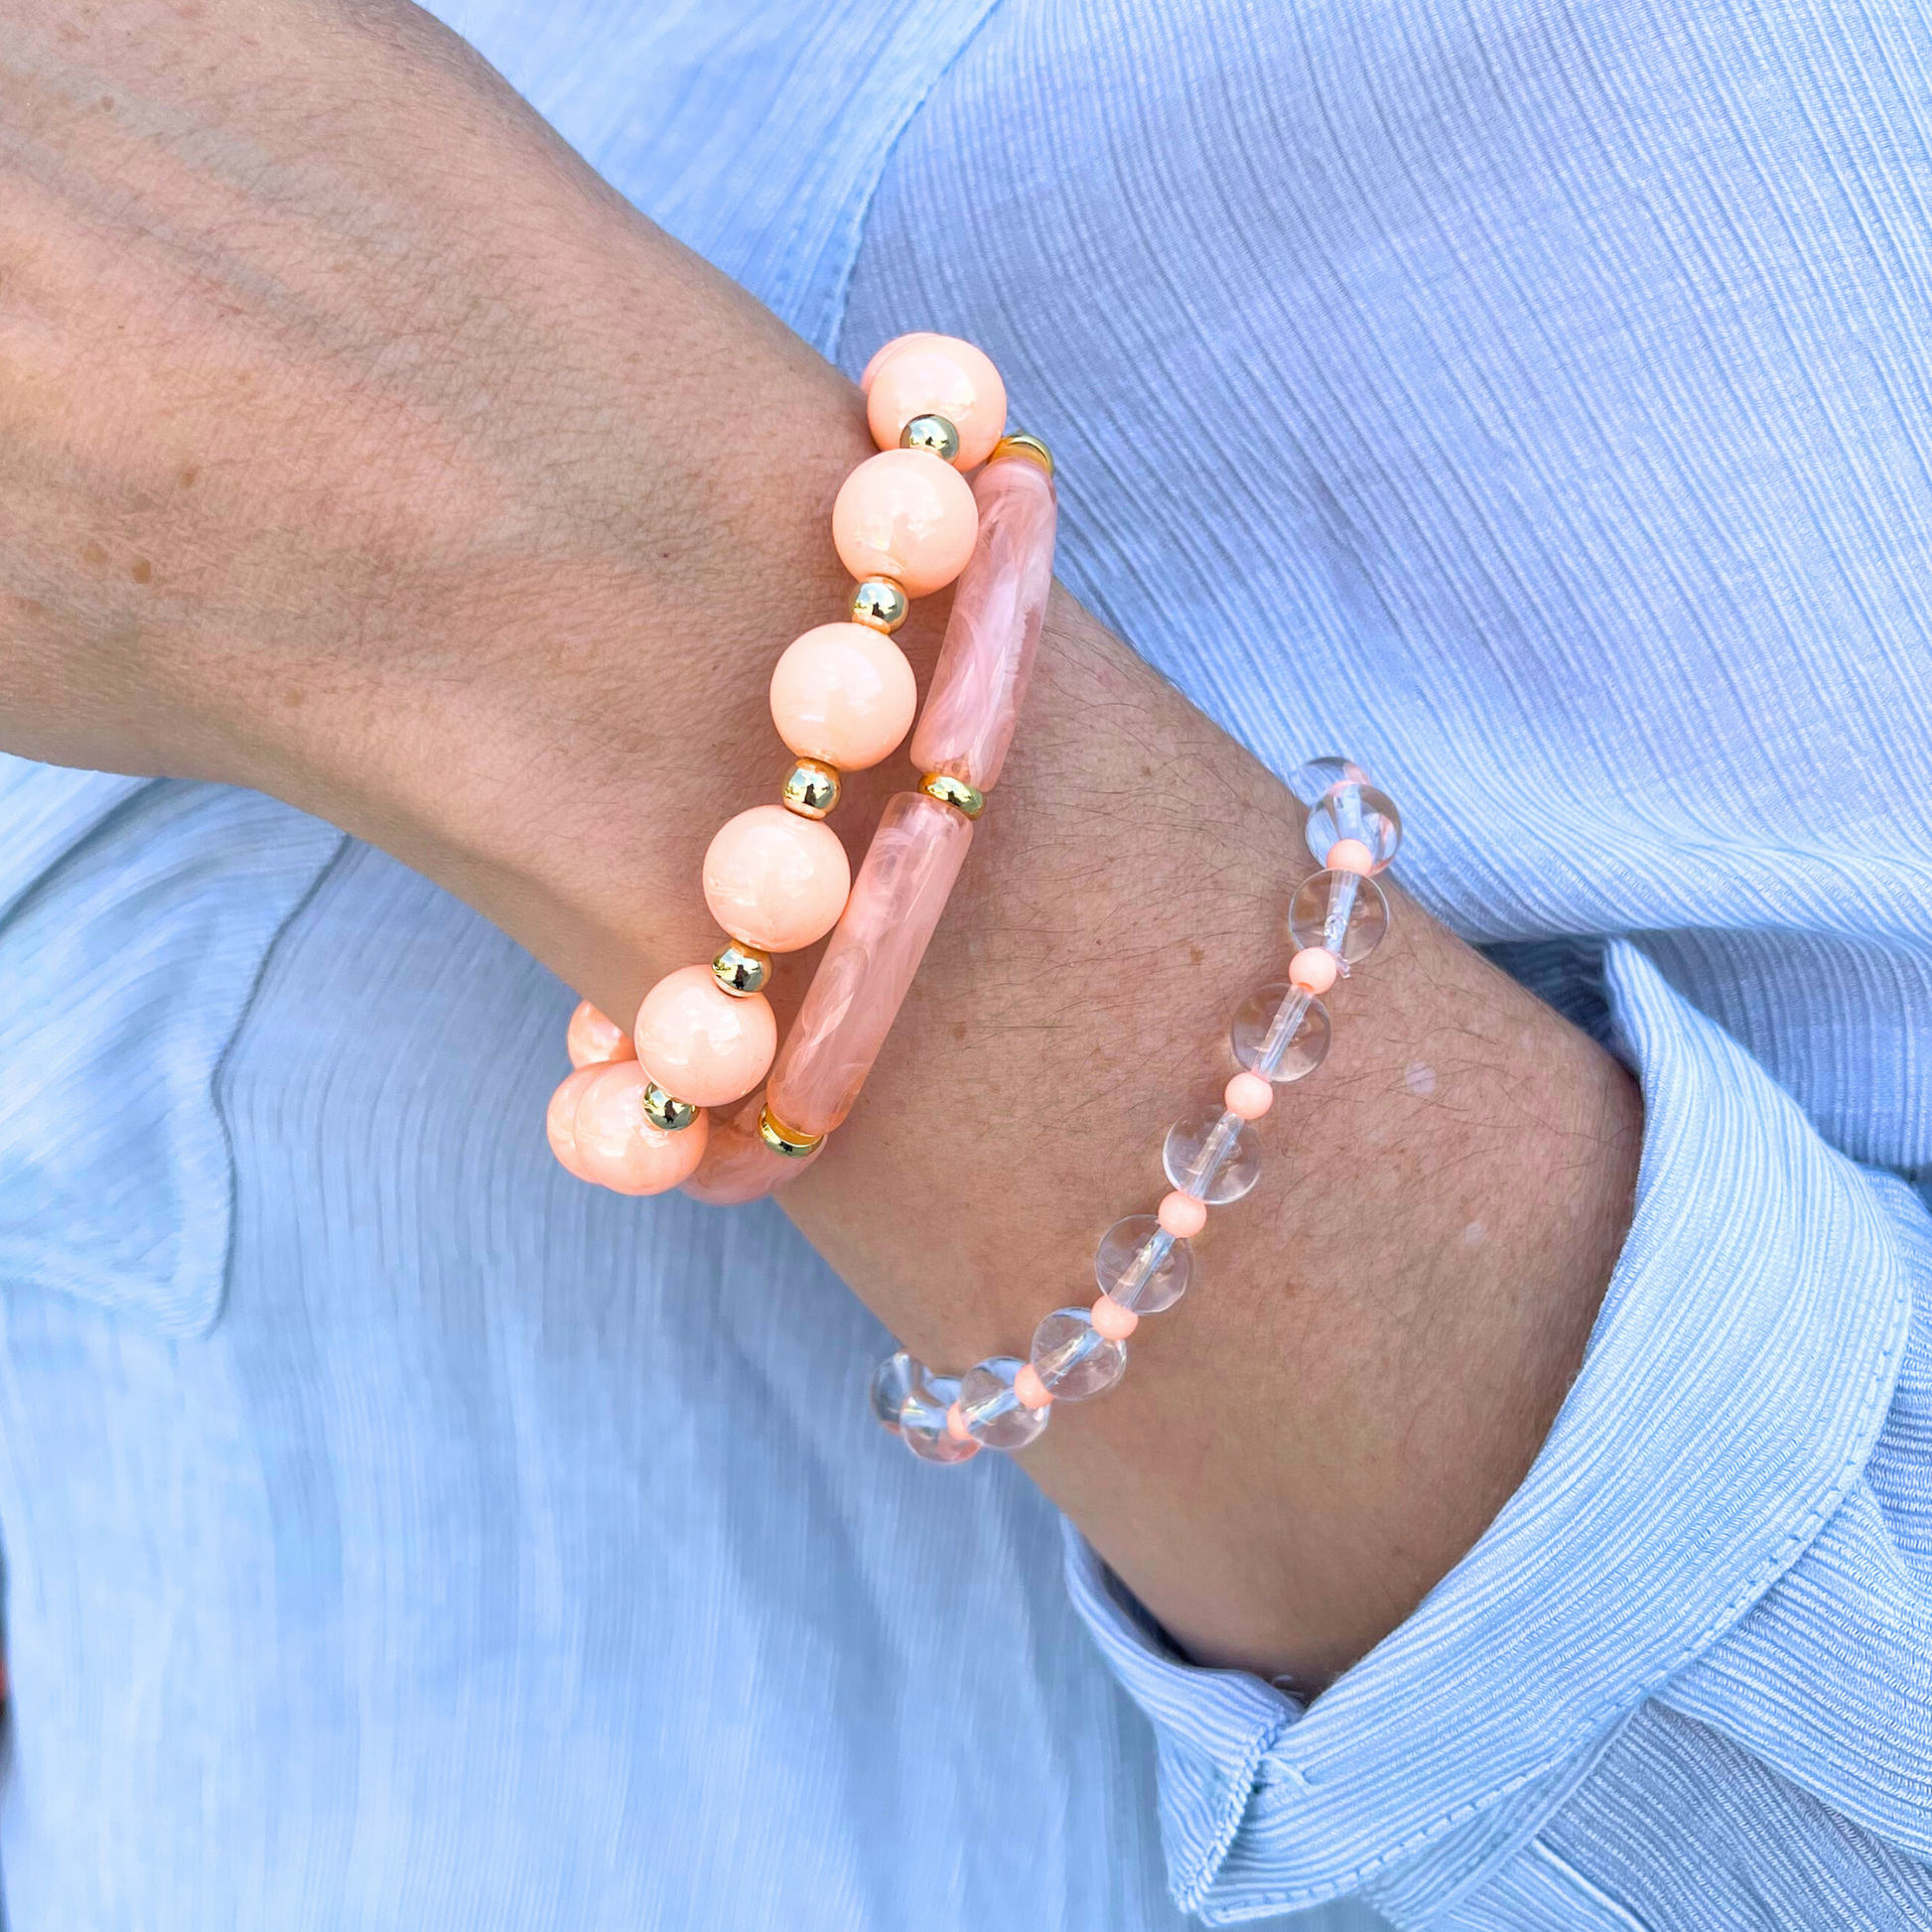 Model wearing a 3-peice peach golden hour beach bracelet set. Designed with 8mm skinny acrylic bamboo tubes with alternating gold flats. Chunky 12mm peach iridedescent acrylic beads with alternating 5mm gold beads. 6mm clear quartz round beads with alternating 4mm peach acrylic beads.